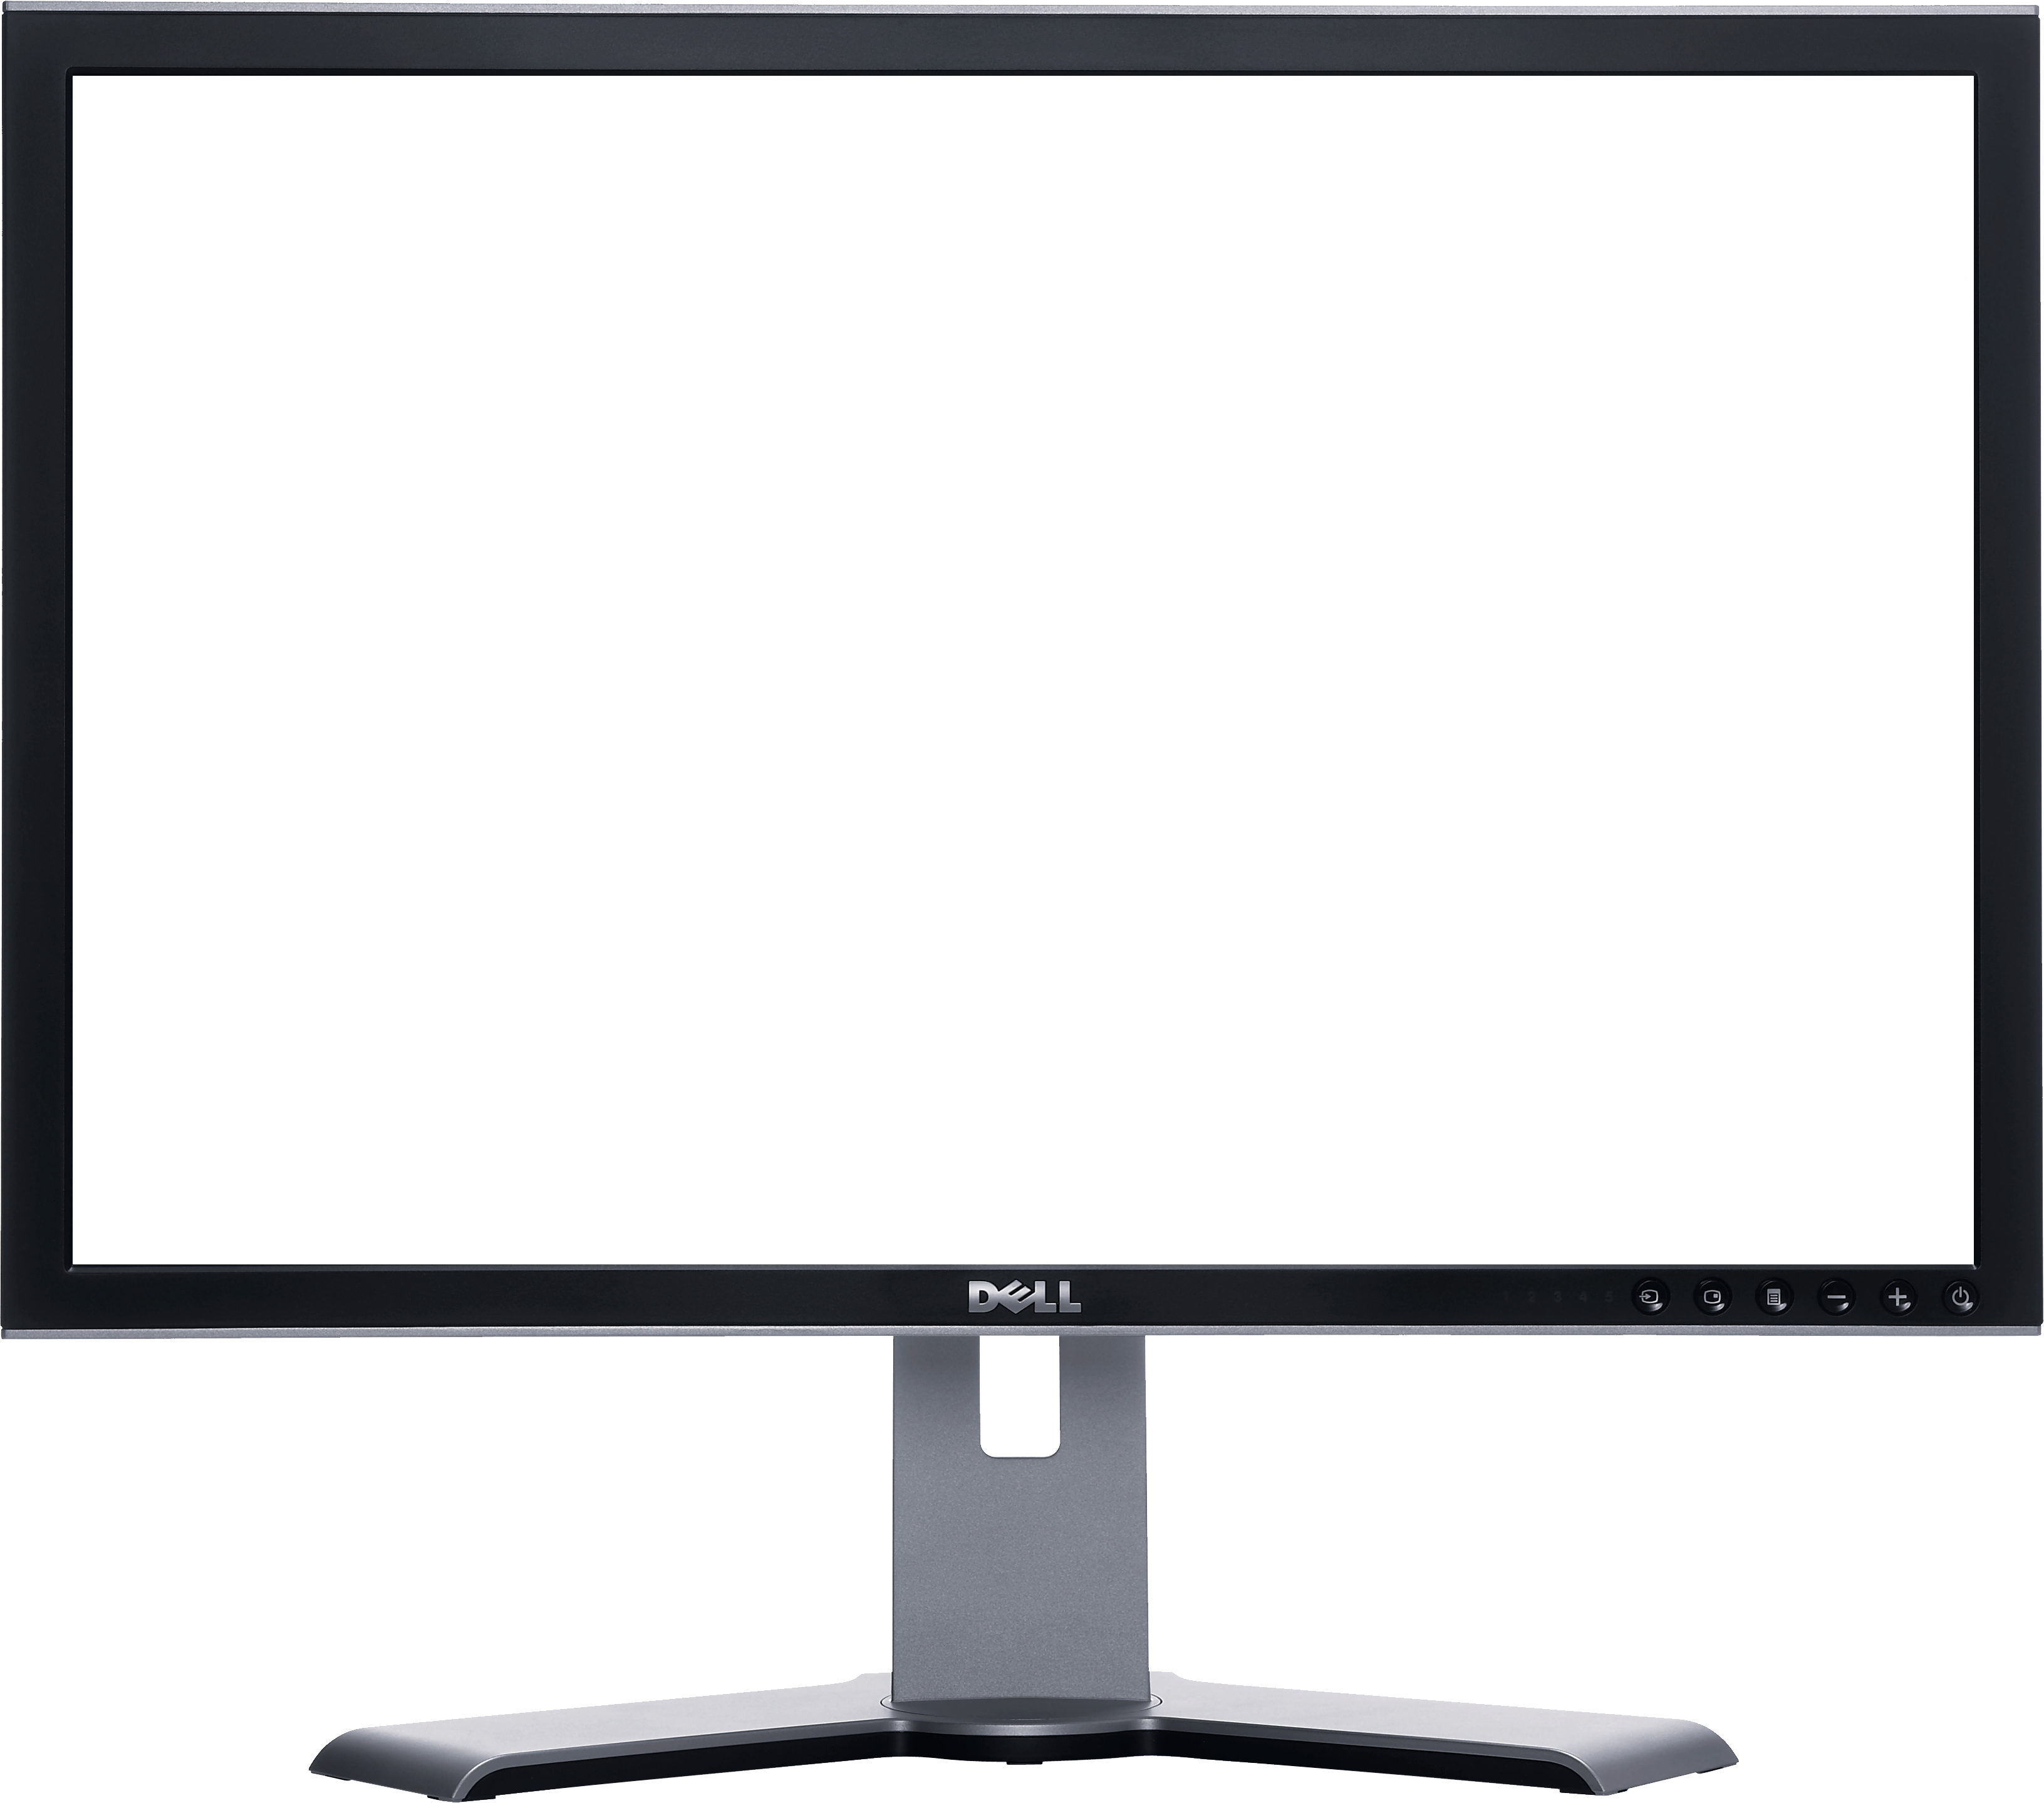 Dell monitor png.